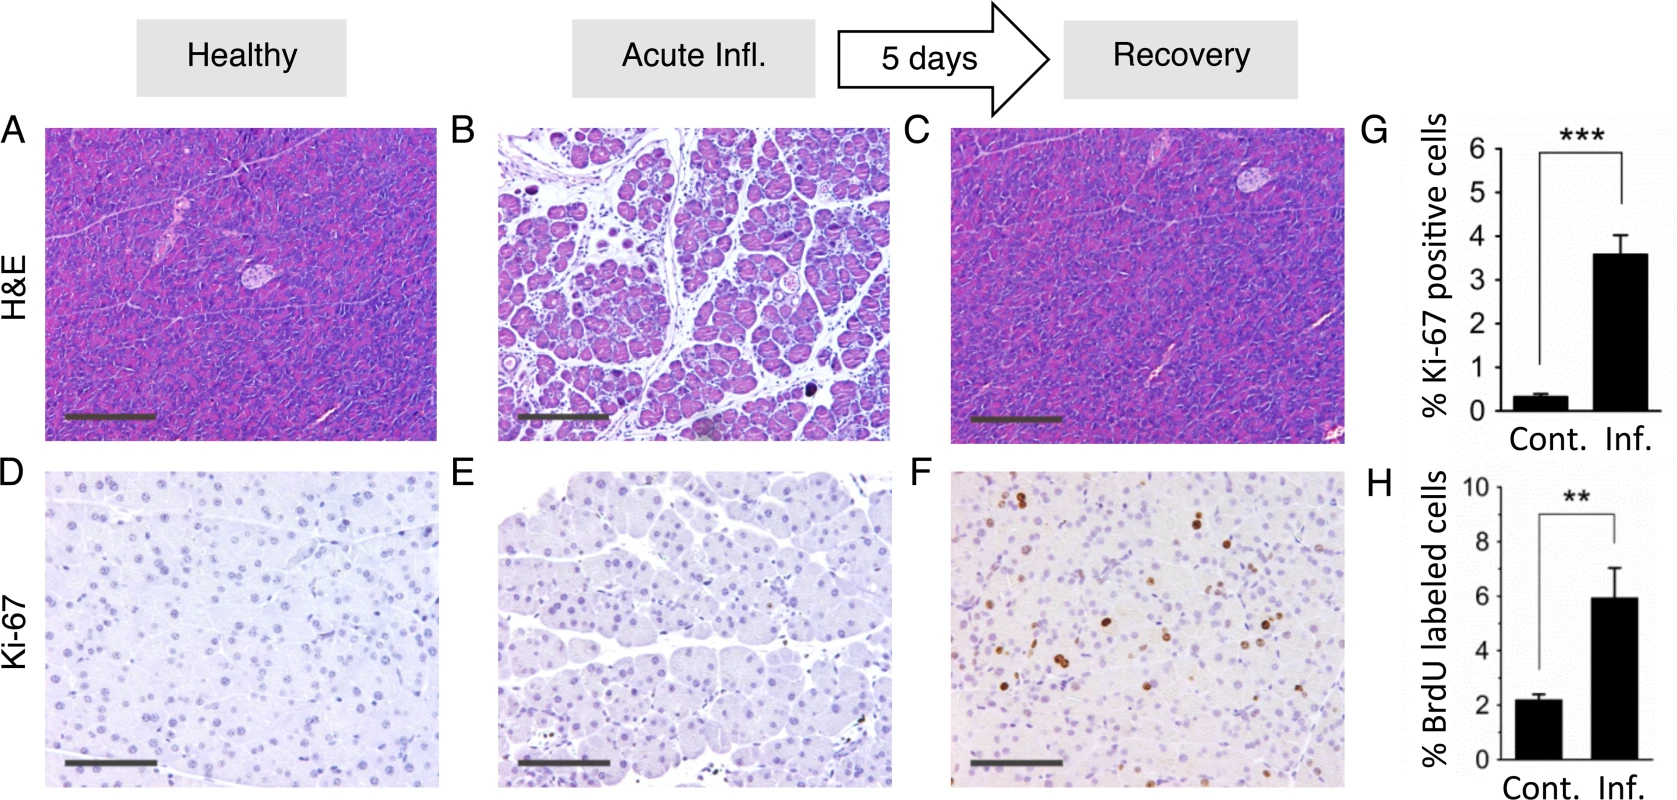 Inflammation and regenerative cell proliferation are separated in acute cerulein pancreatitis.